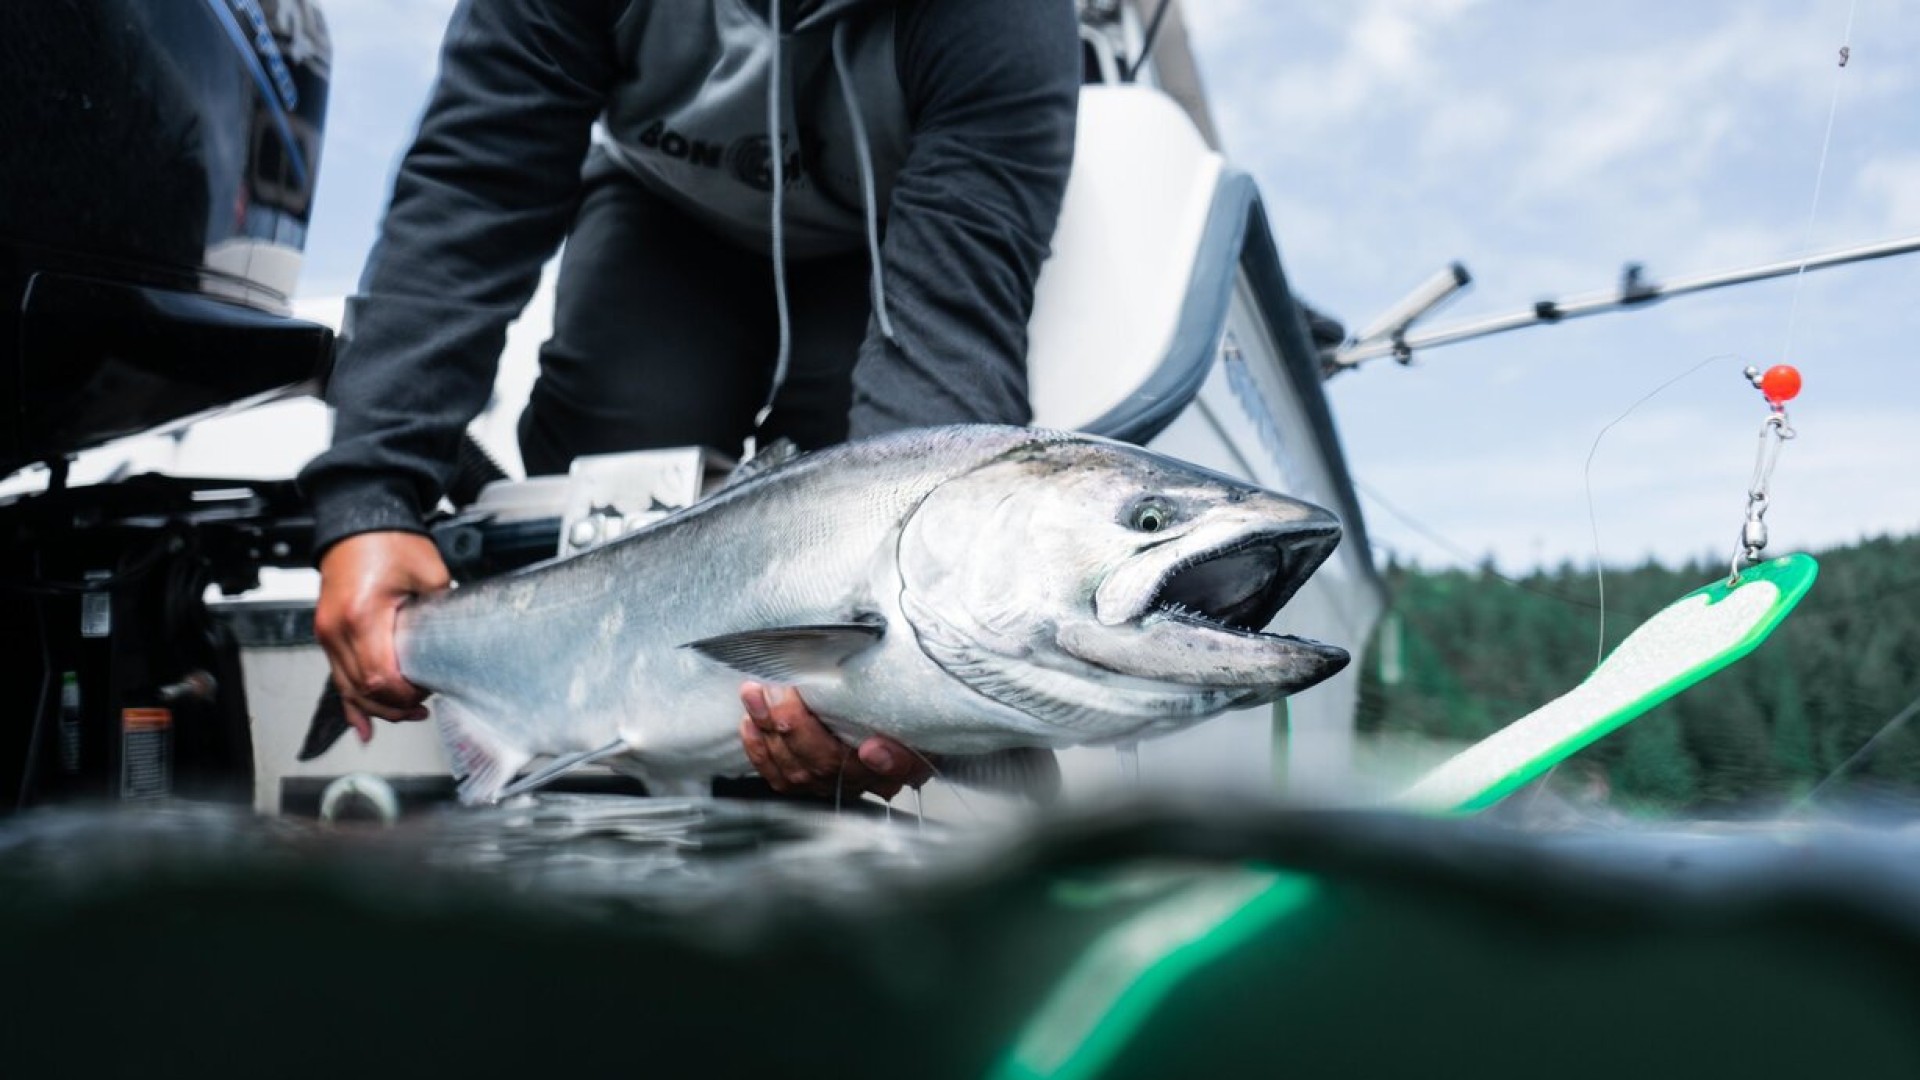 Boat Show Sale - New And Used Gear! - Bon Chovy Salmon Fishing Charters